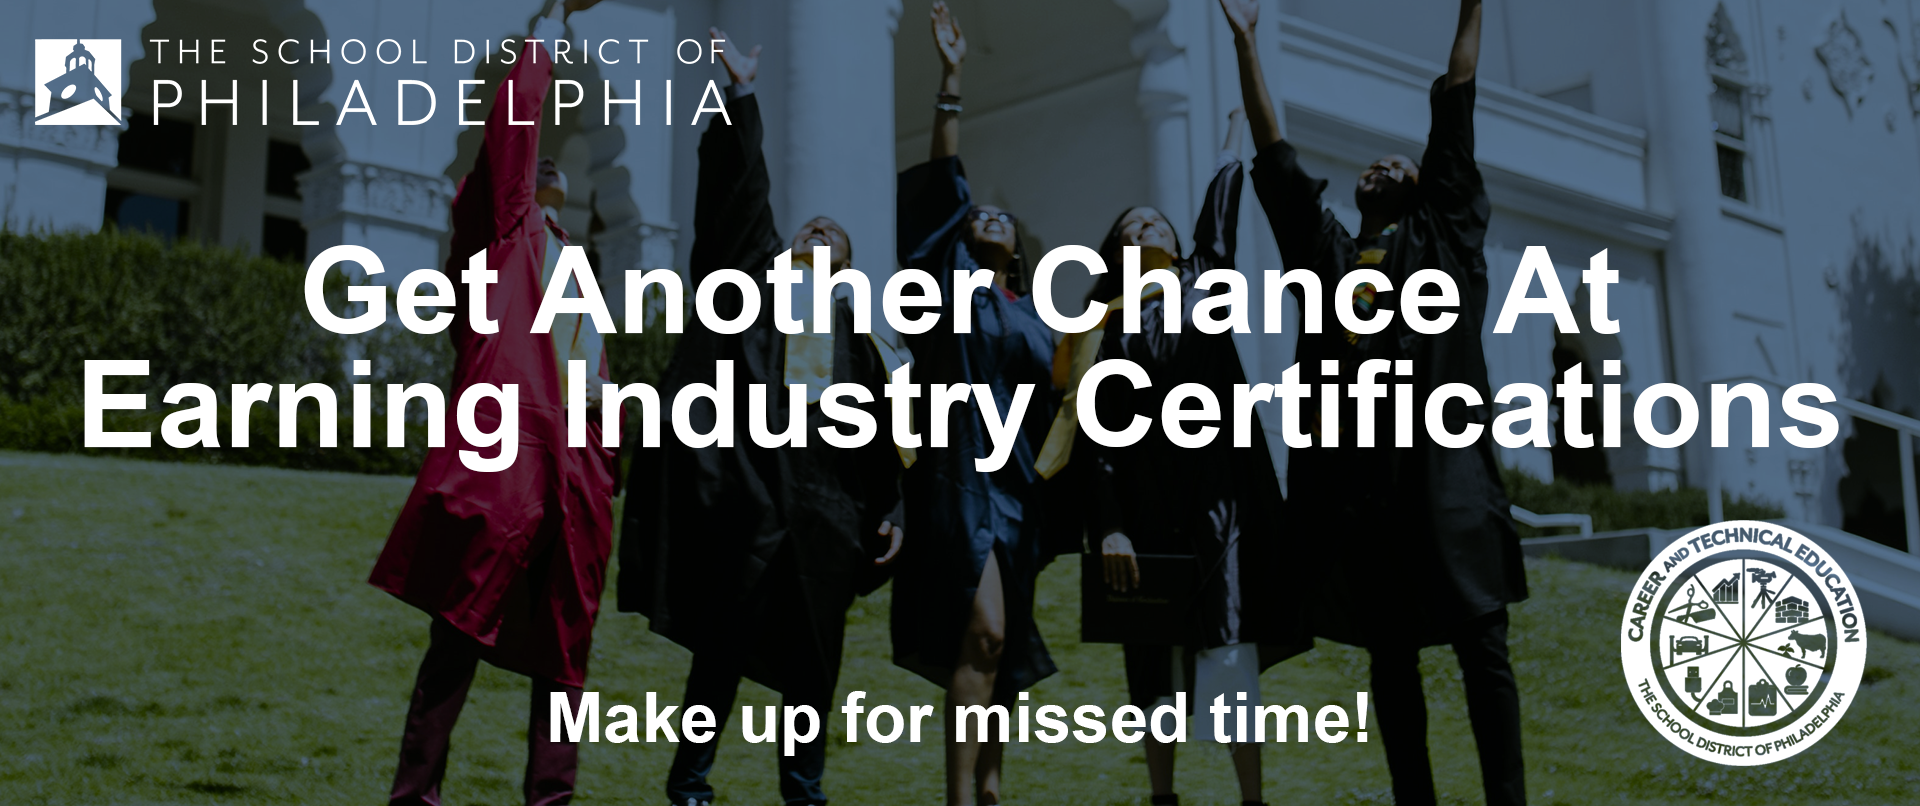 Get Another Chance At Earning Industry Certifications; Make up for missed time!